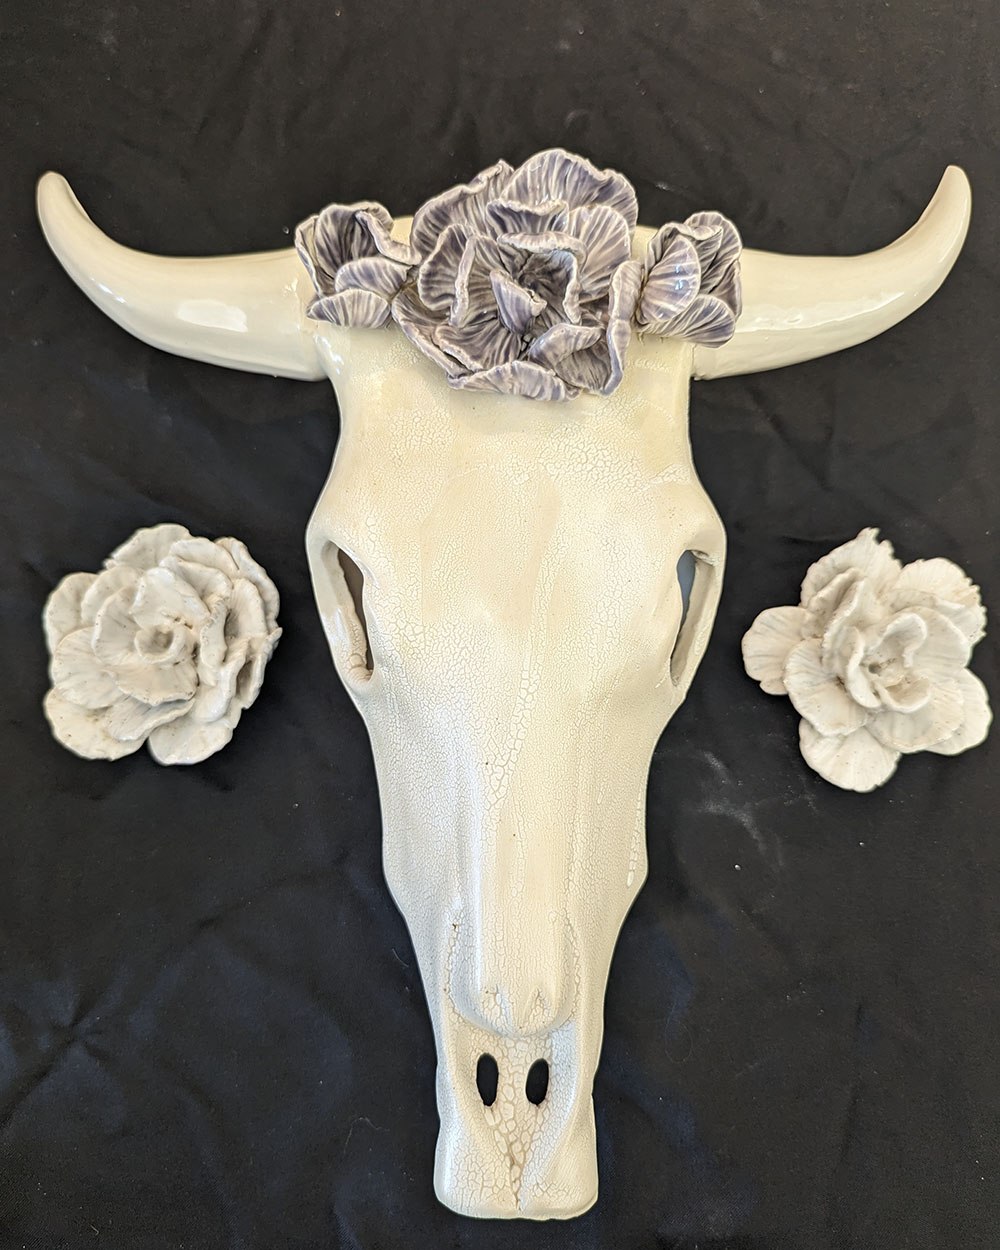 A ceramic mold of an animal's horned skull sits between two white ceramic flowers.